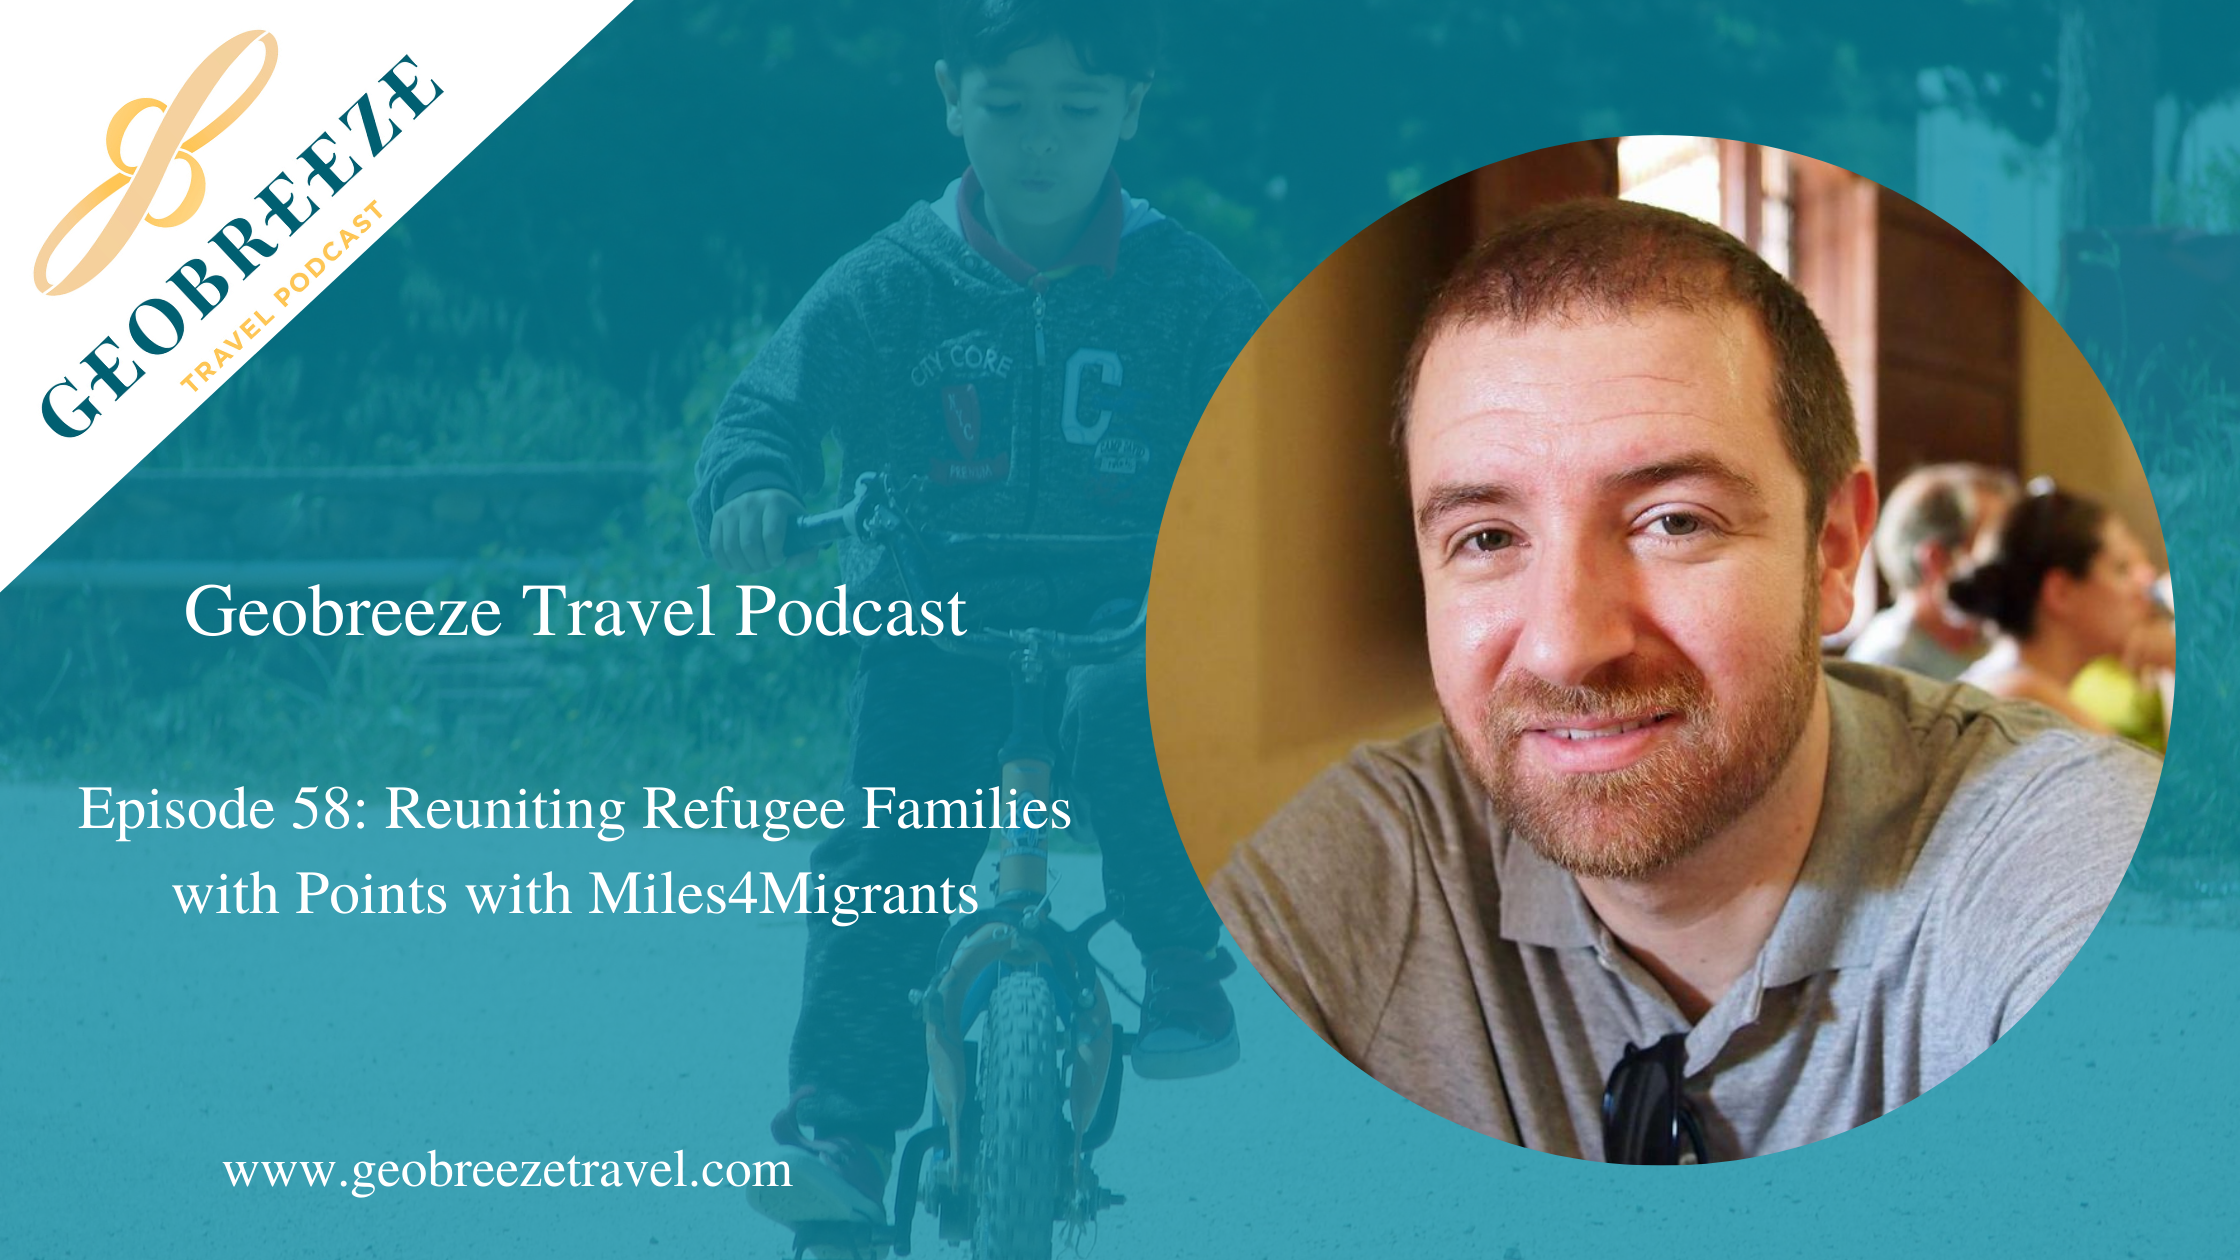 Episode 58: Reuniting Refugee Families with Points with Miles4Migrants